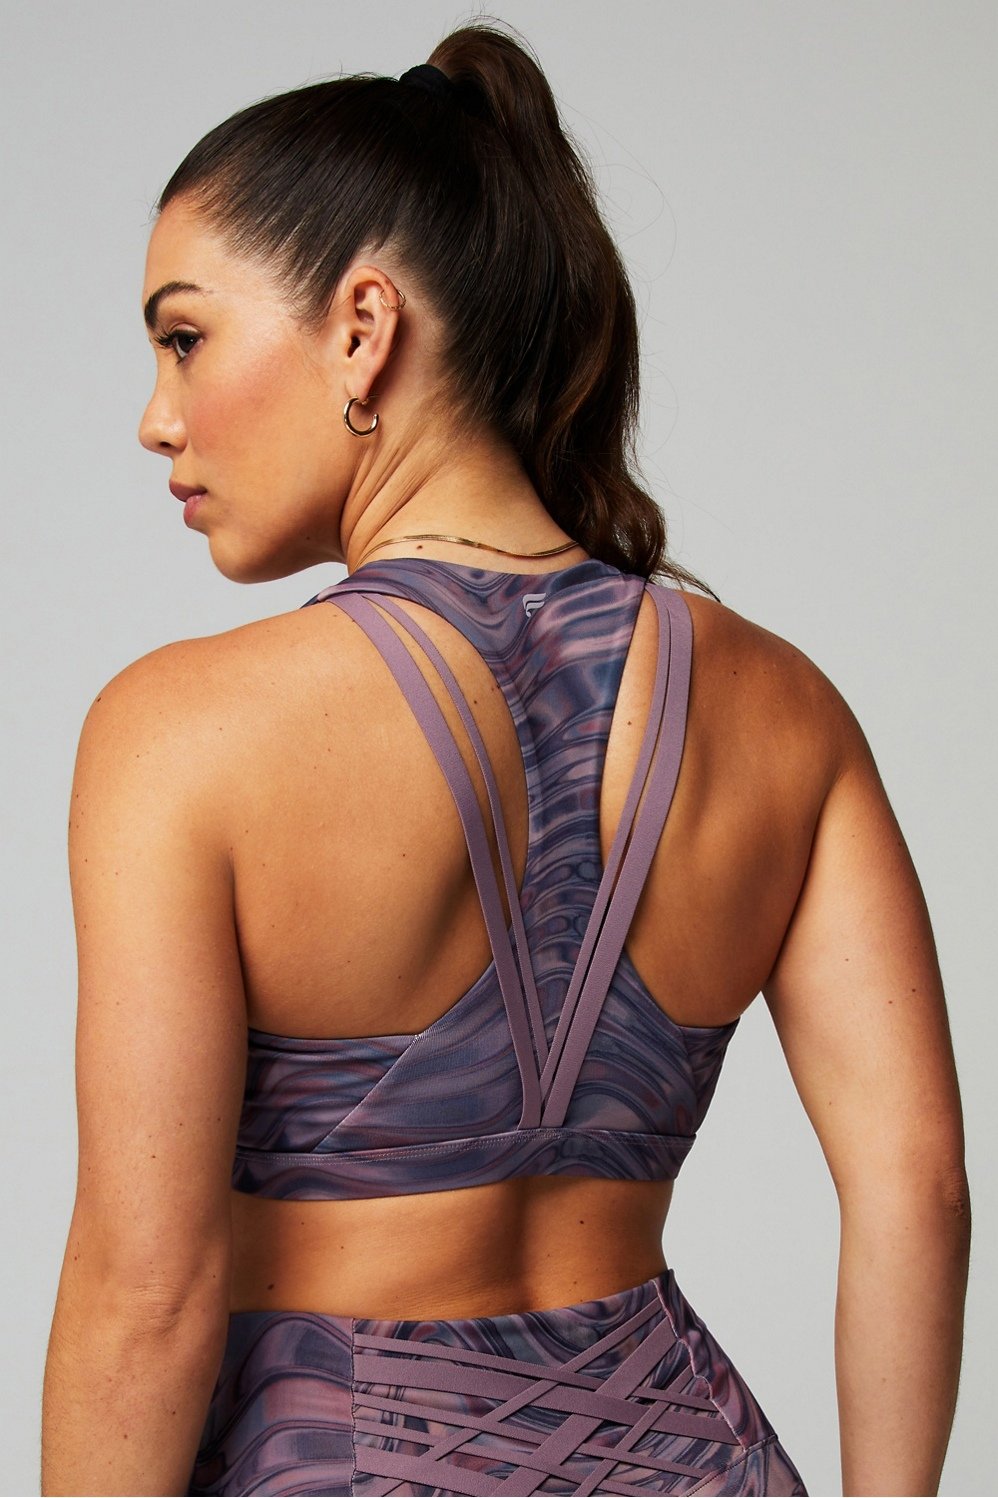 Standard sports bra from the front, major strap party from the